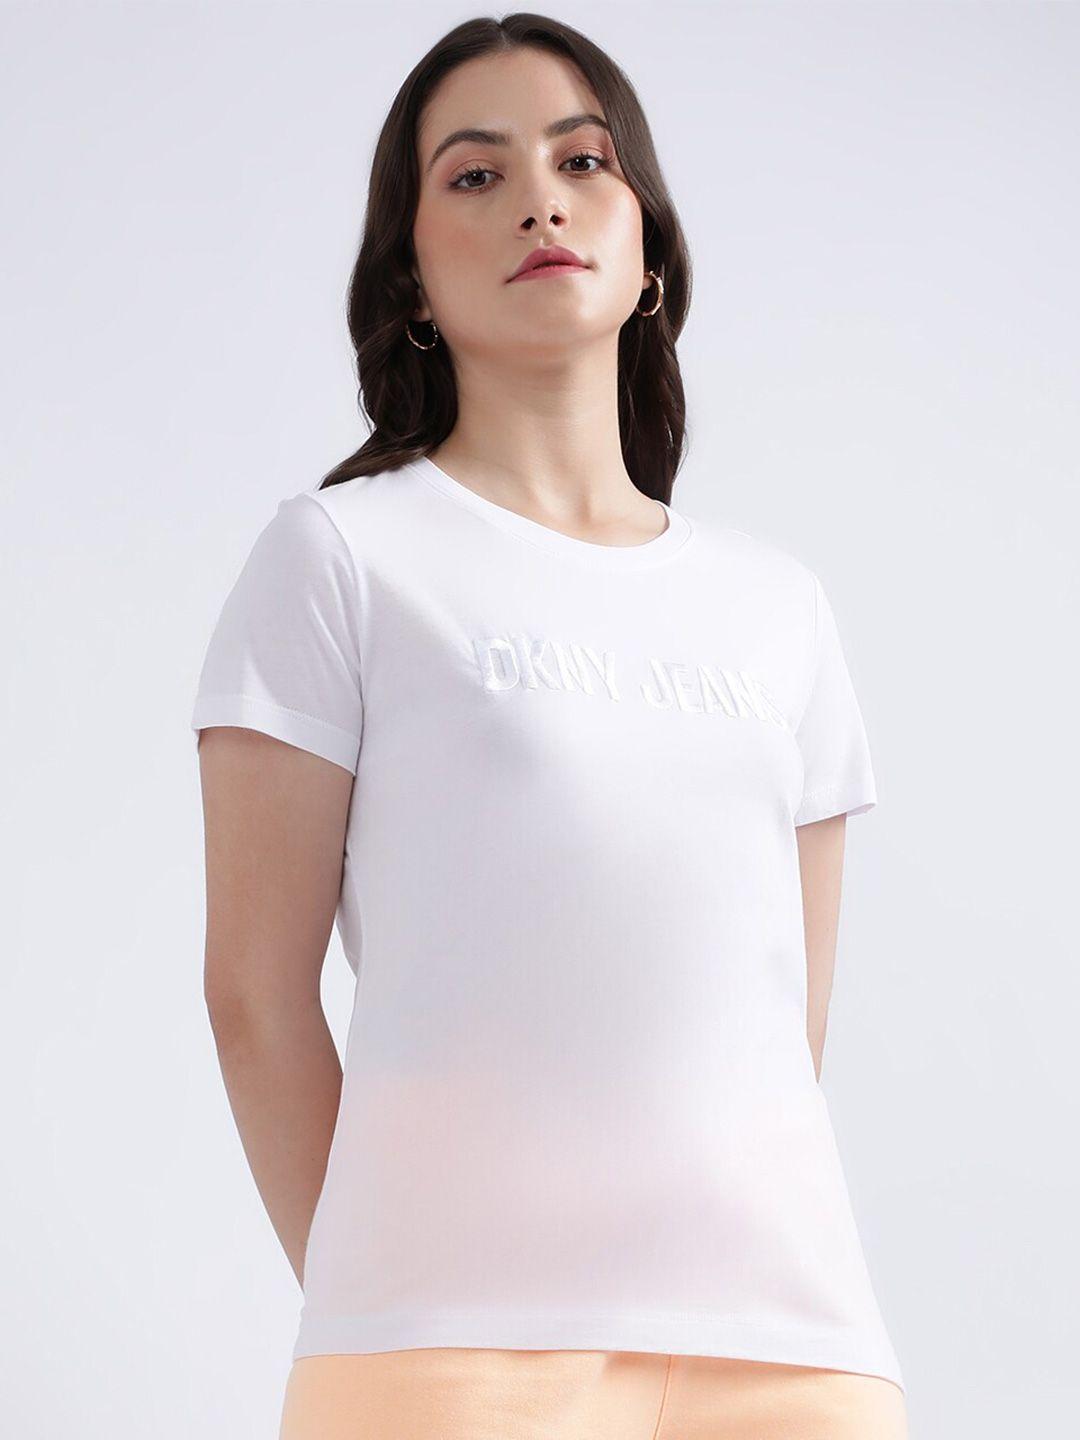 dkny typography embroidered cotton t-shirt